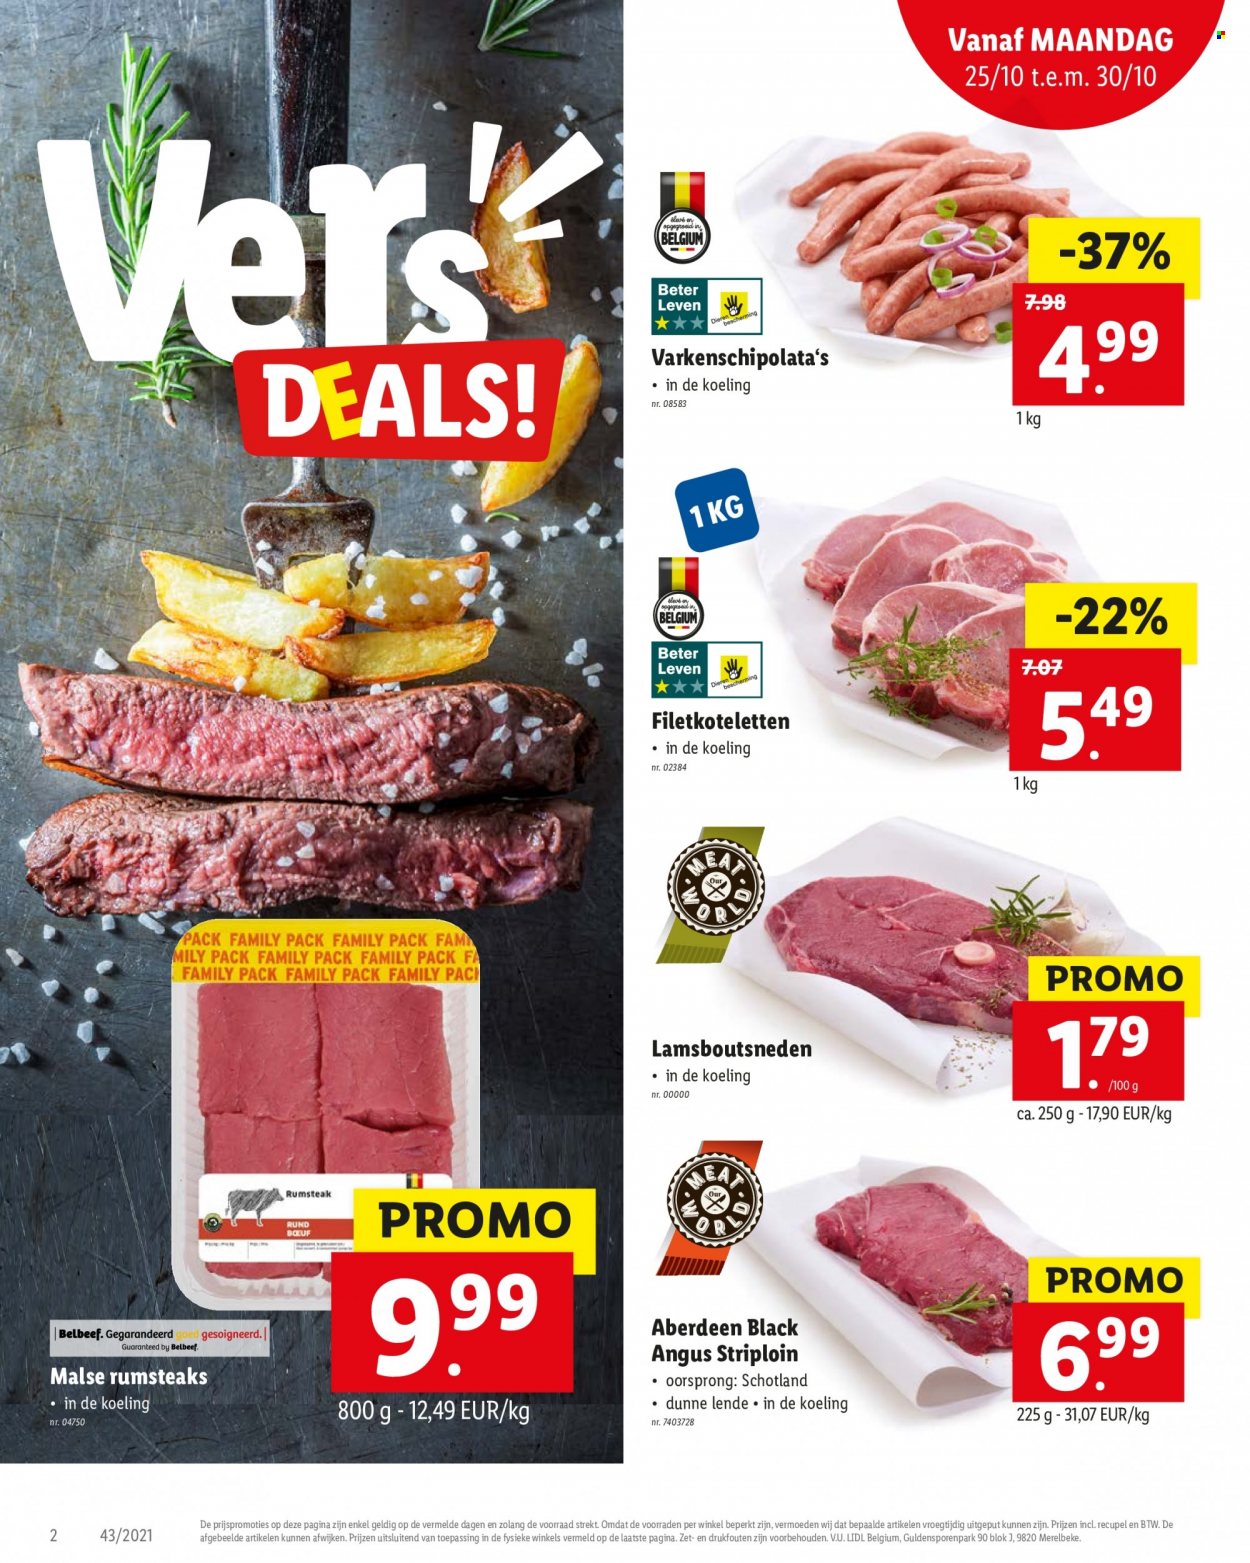 Catalogue Lidl - 25.10.2021 - 30.10.2021. Page 2.